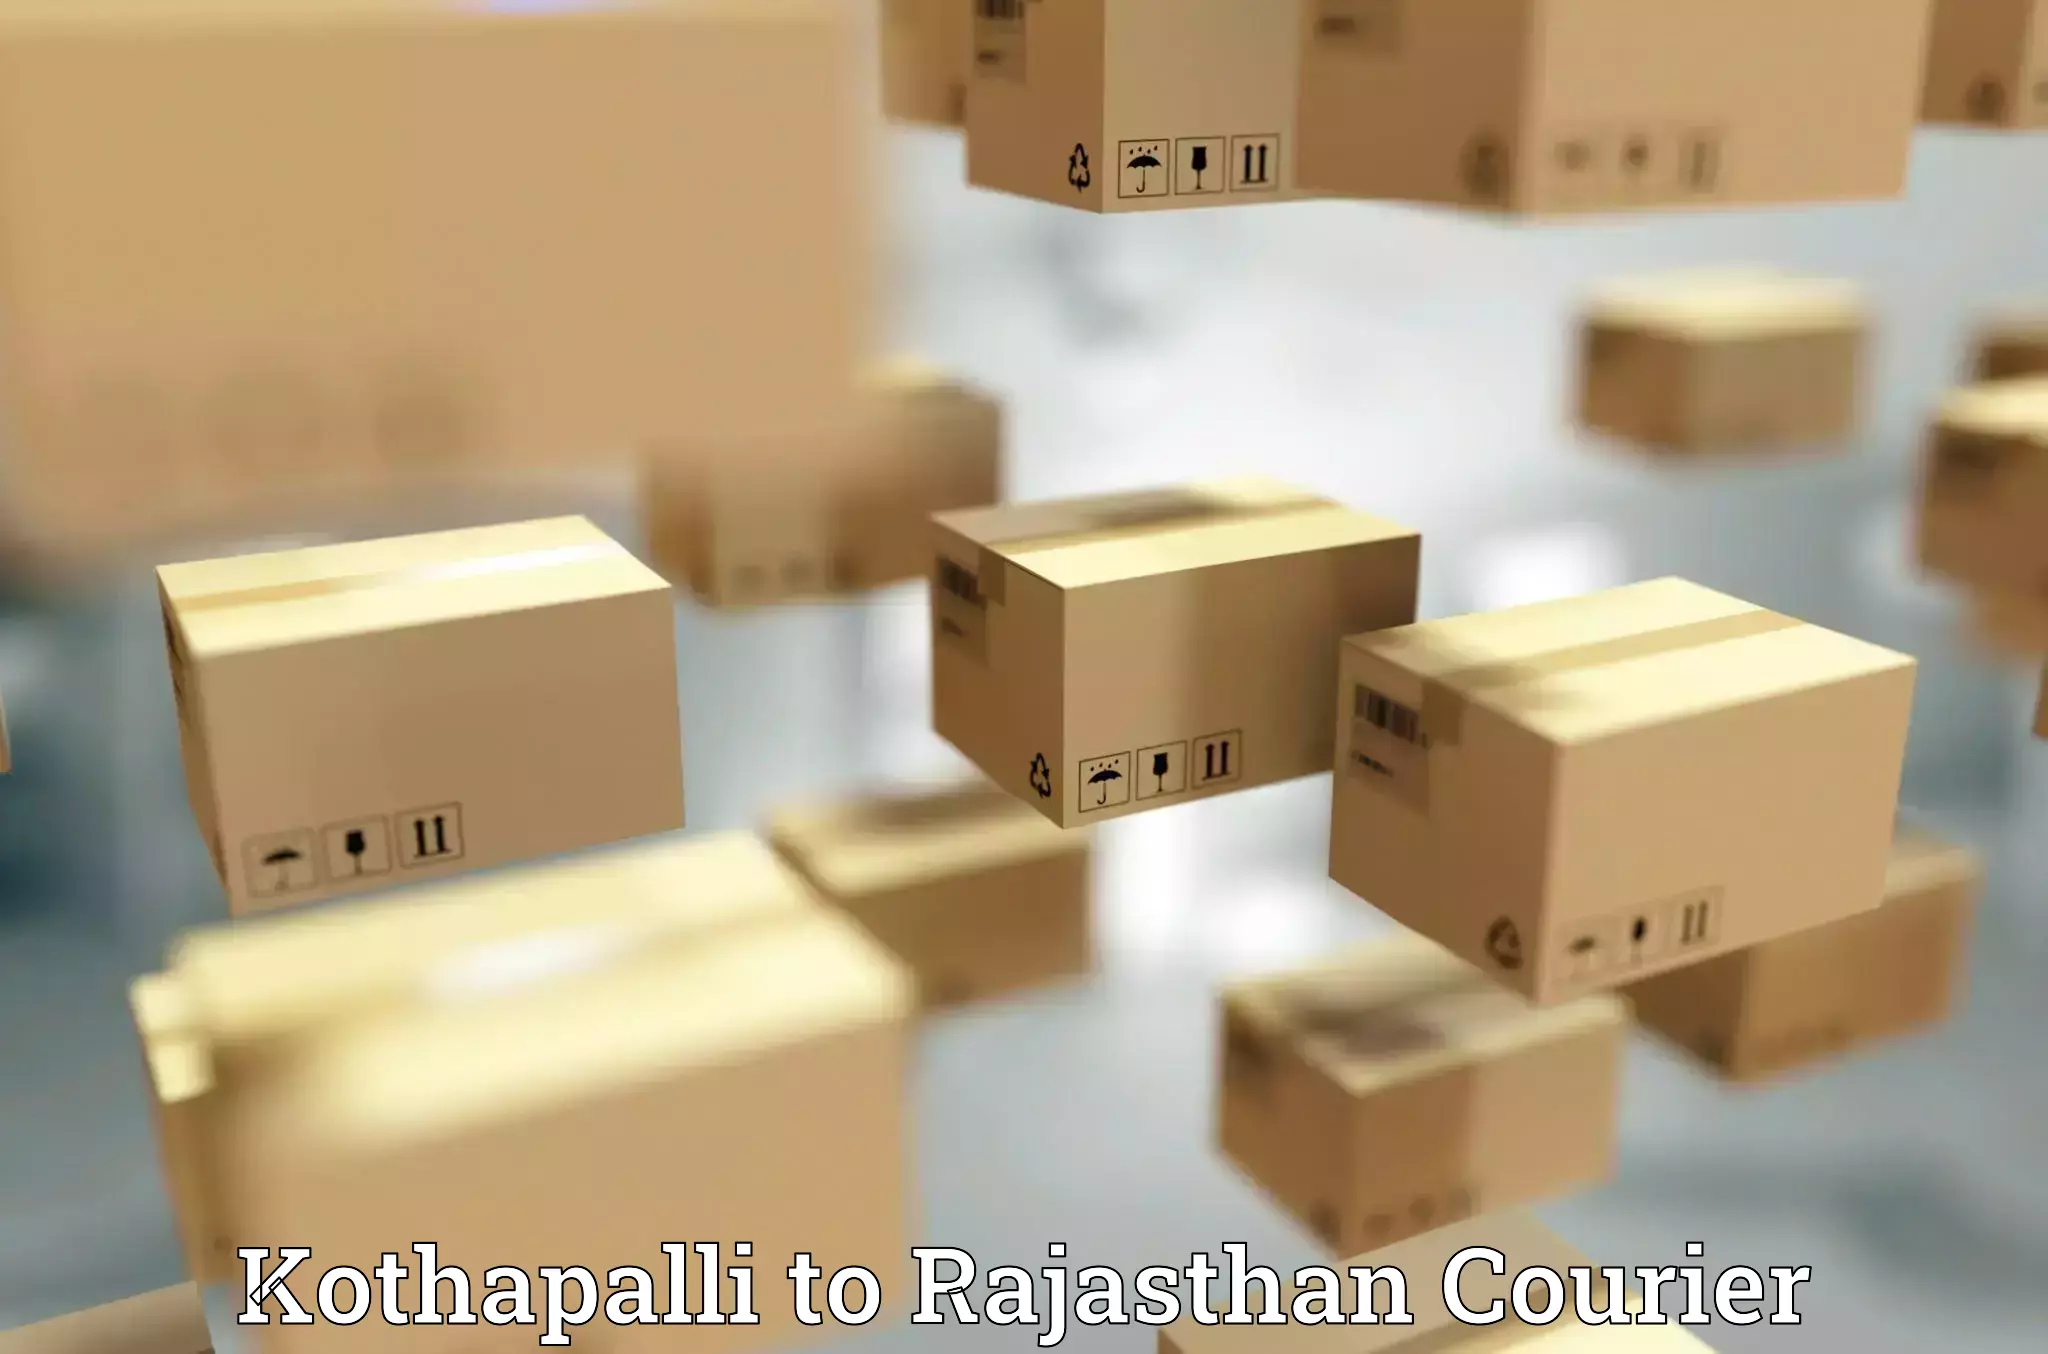 Multi-national courier services Kothapalli to Rajgarh Rajasthan